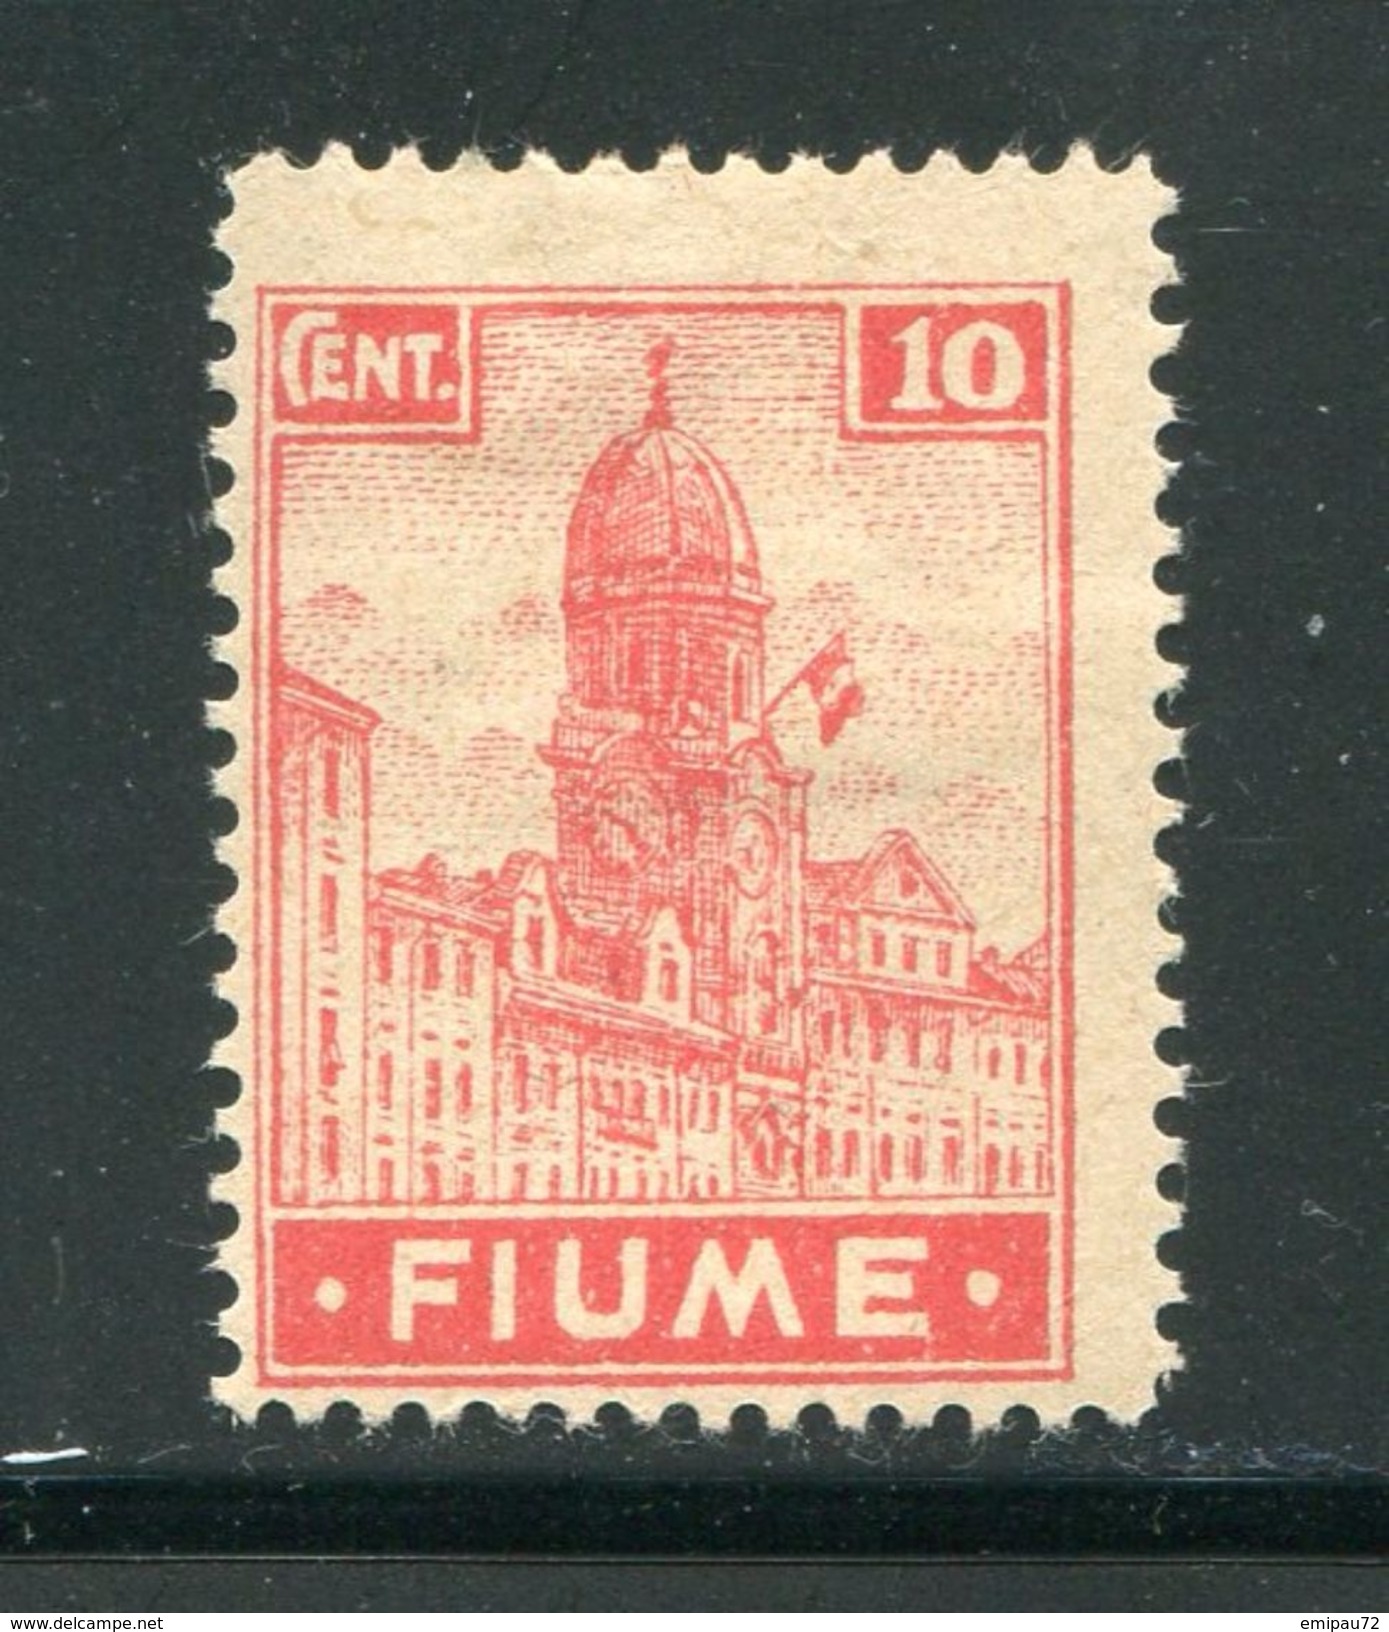 ITALIE- FIUME- Y&T N°35- Neuf Avec Charnière * - Occ. Yougoslave: Fiume